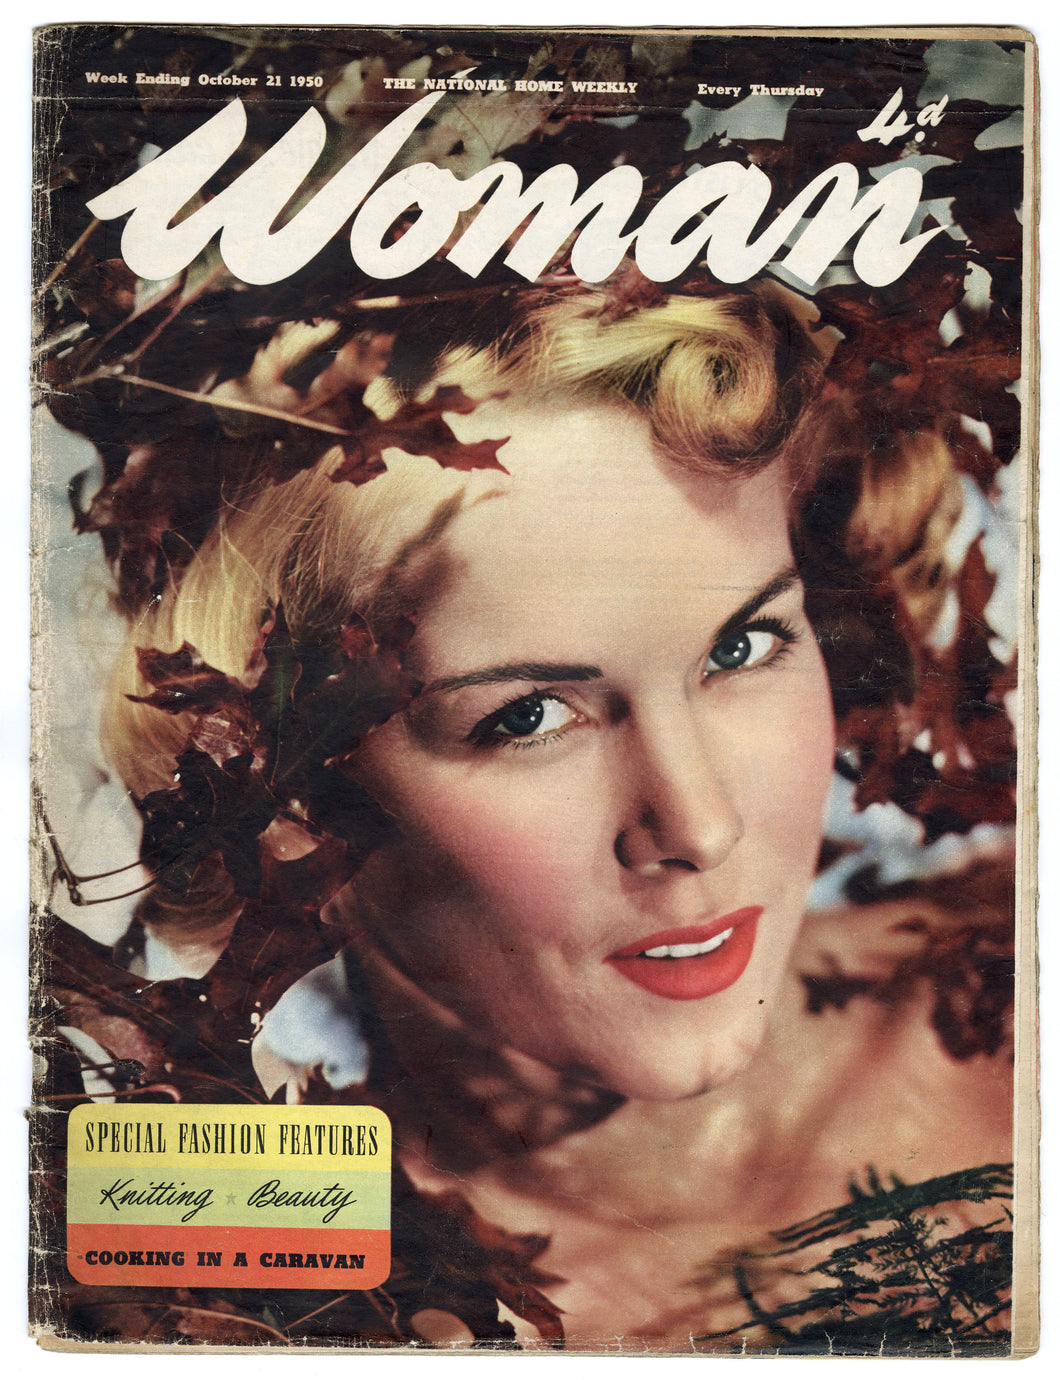 1950 Vintage WOMAN MAGAZINE, National Home Weekly, Fashion, Beauty, Cooking